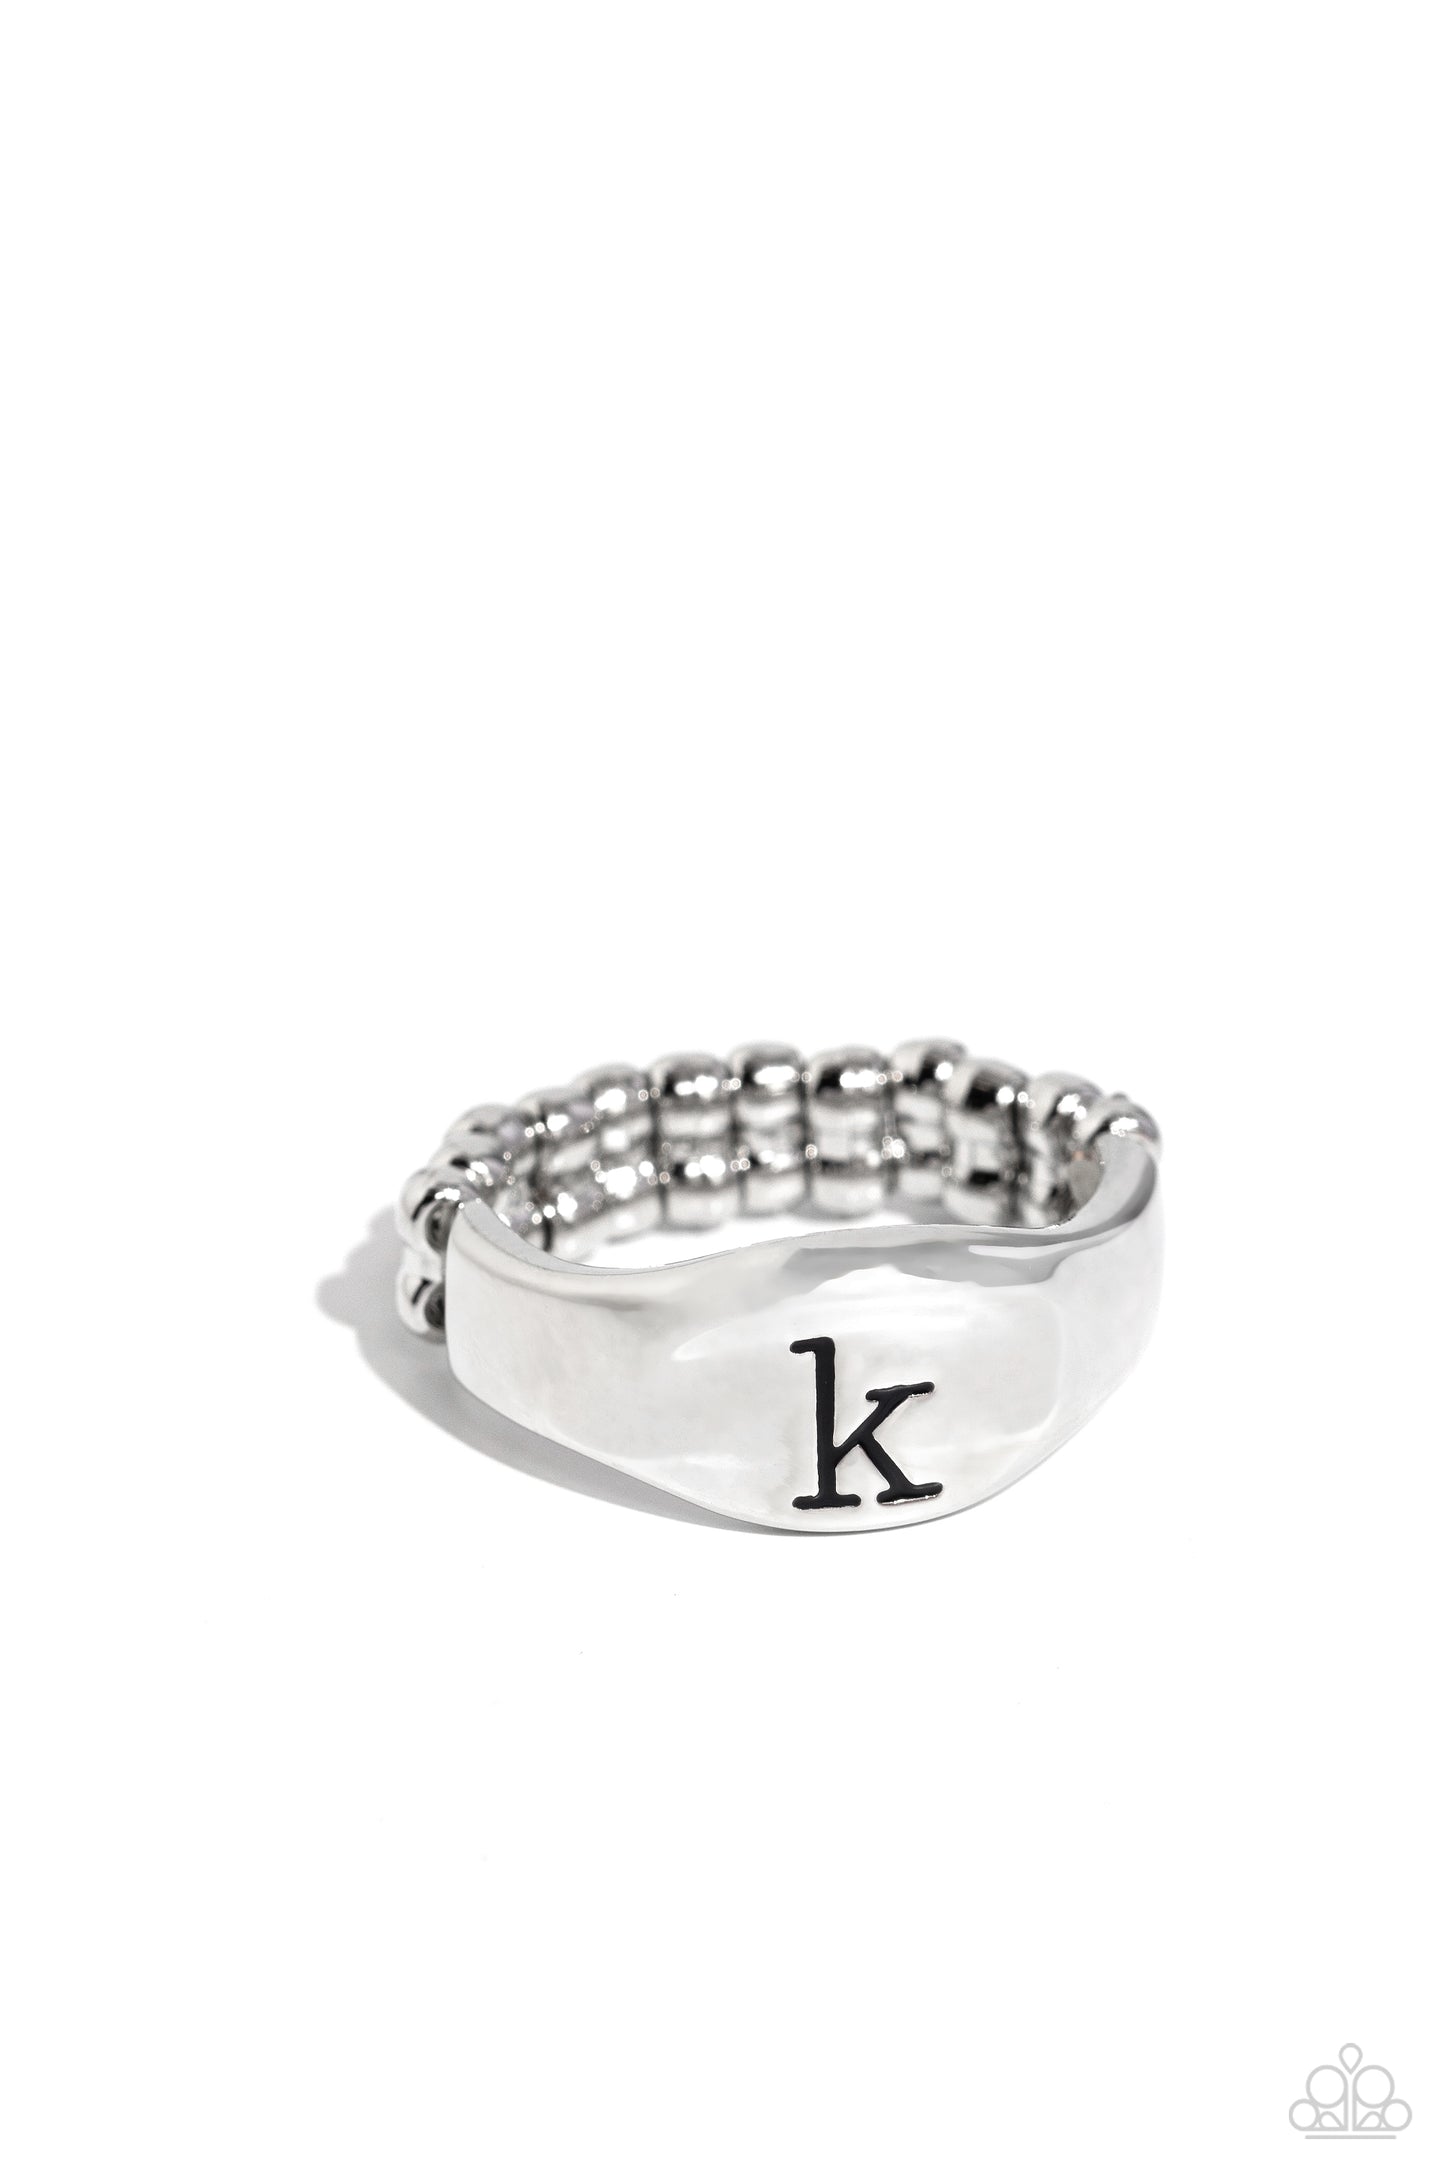 <p>Pressed into the center of a beveled silver band, the black letter "k" stands out for a simple, sentimental centerpiece. Features a stretchy band for a flexible fit.</p> <p><i> Sold as one individual ring.</i></p>